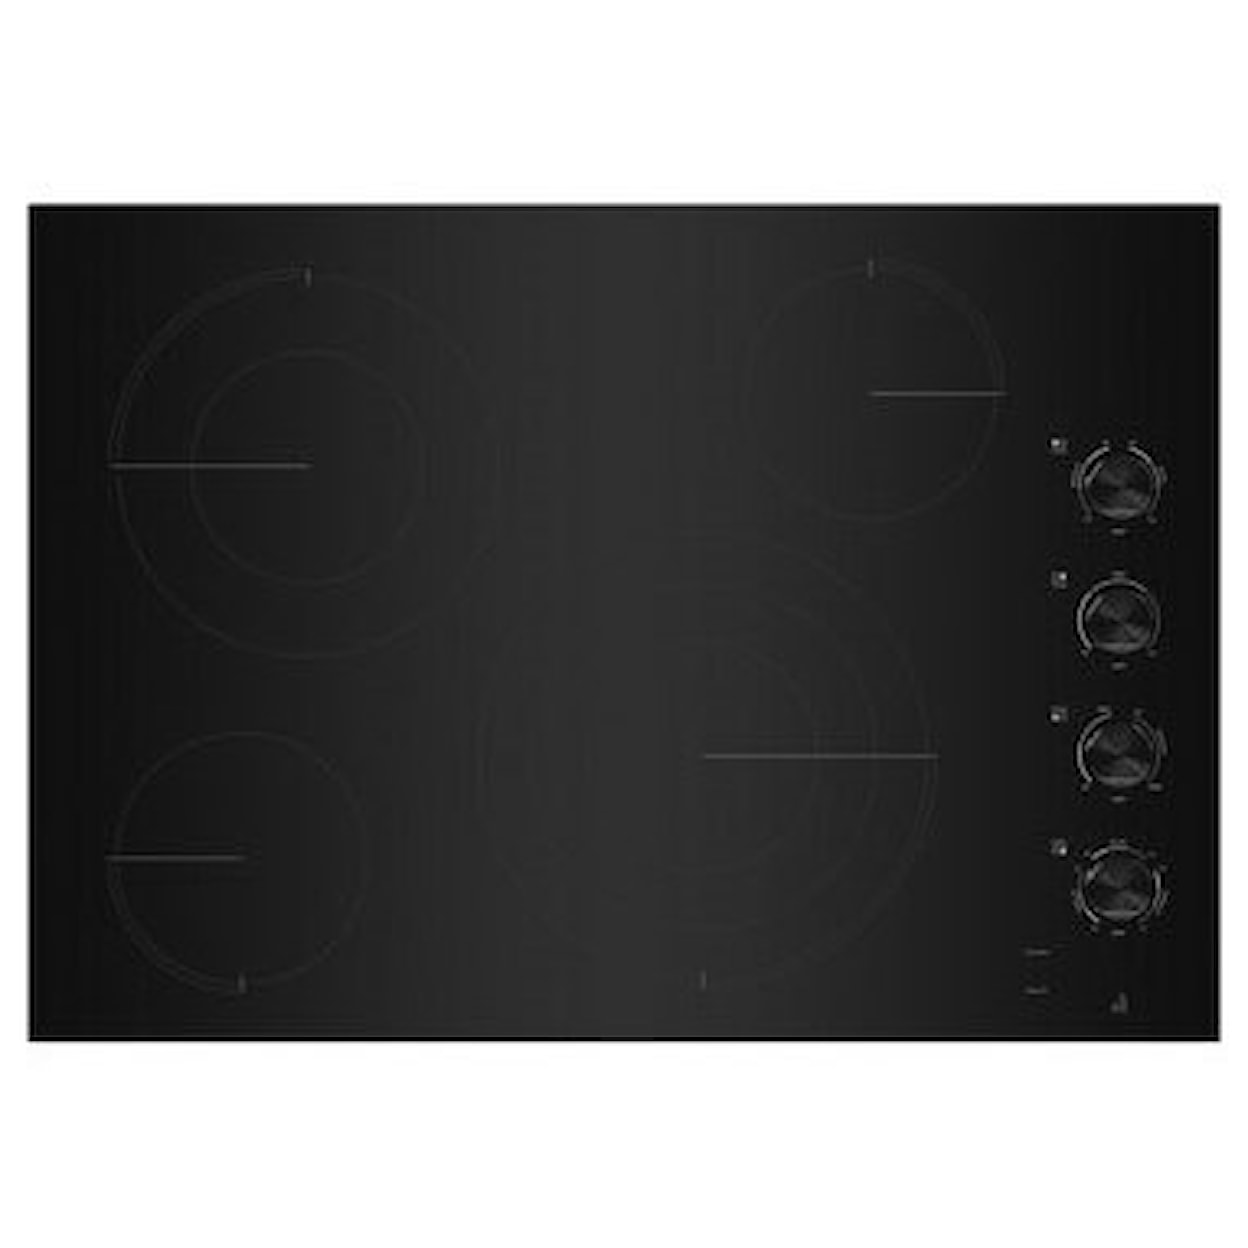 Jenn-Air Cooktops - Electric Glass 30" Electric Radiant Cooktop